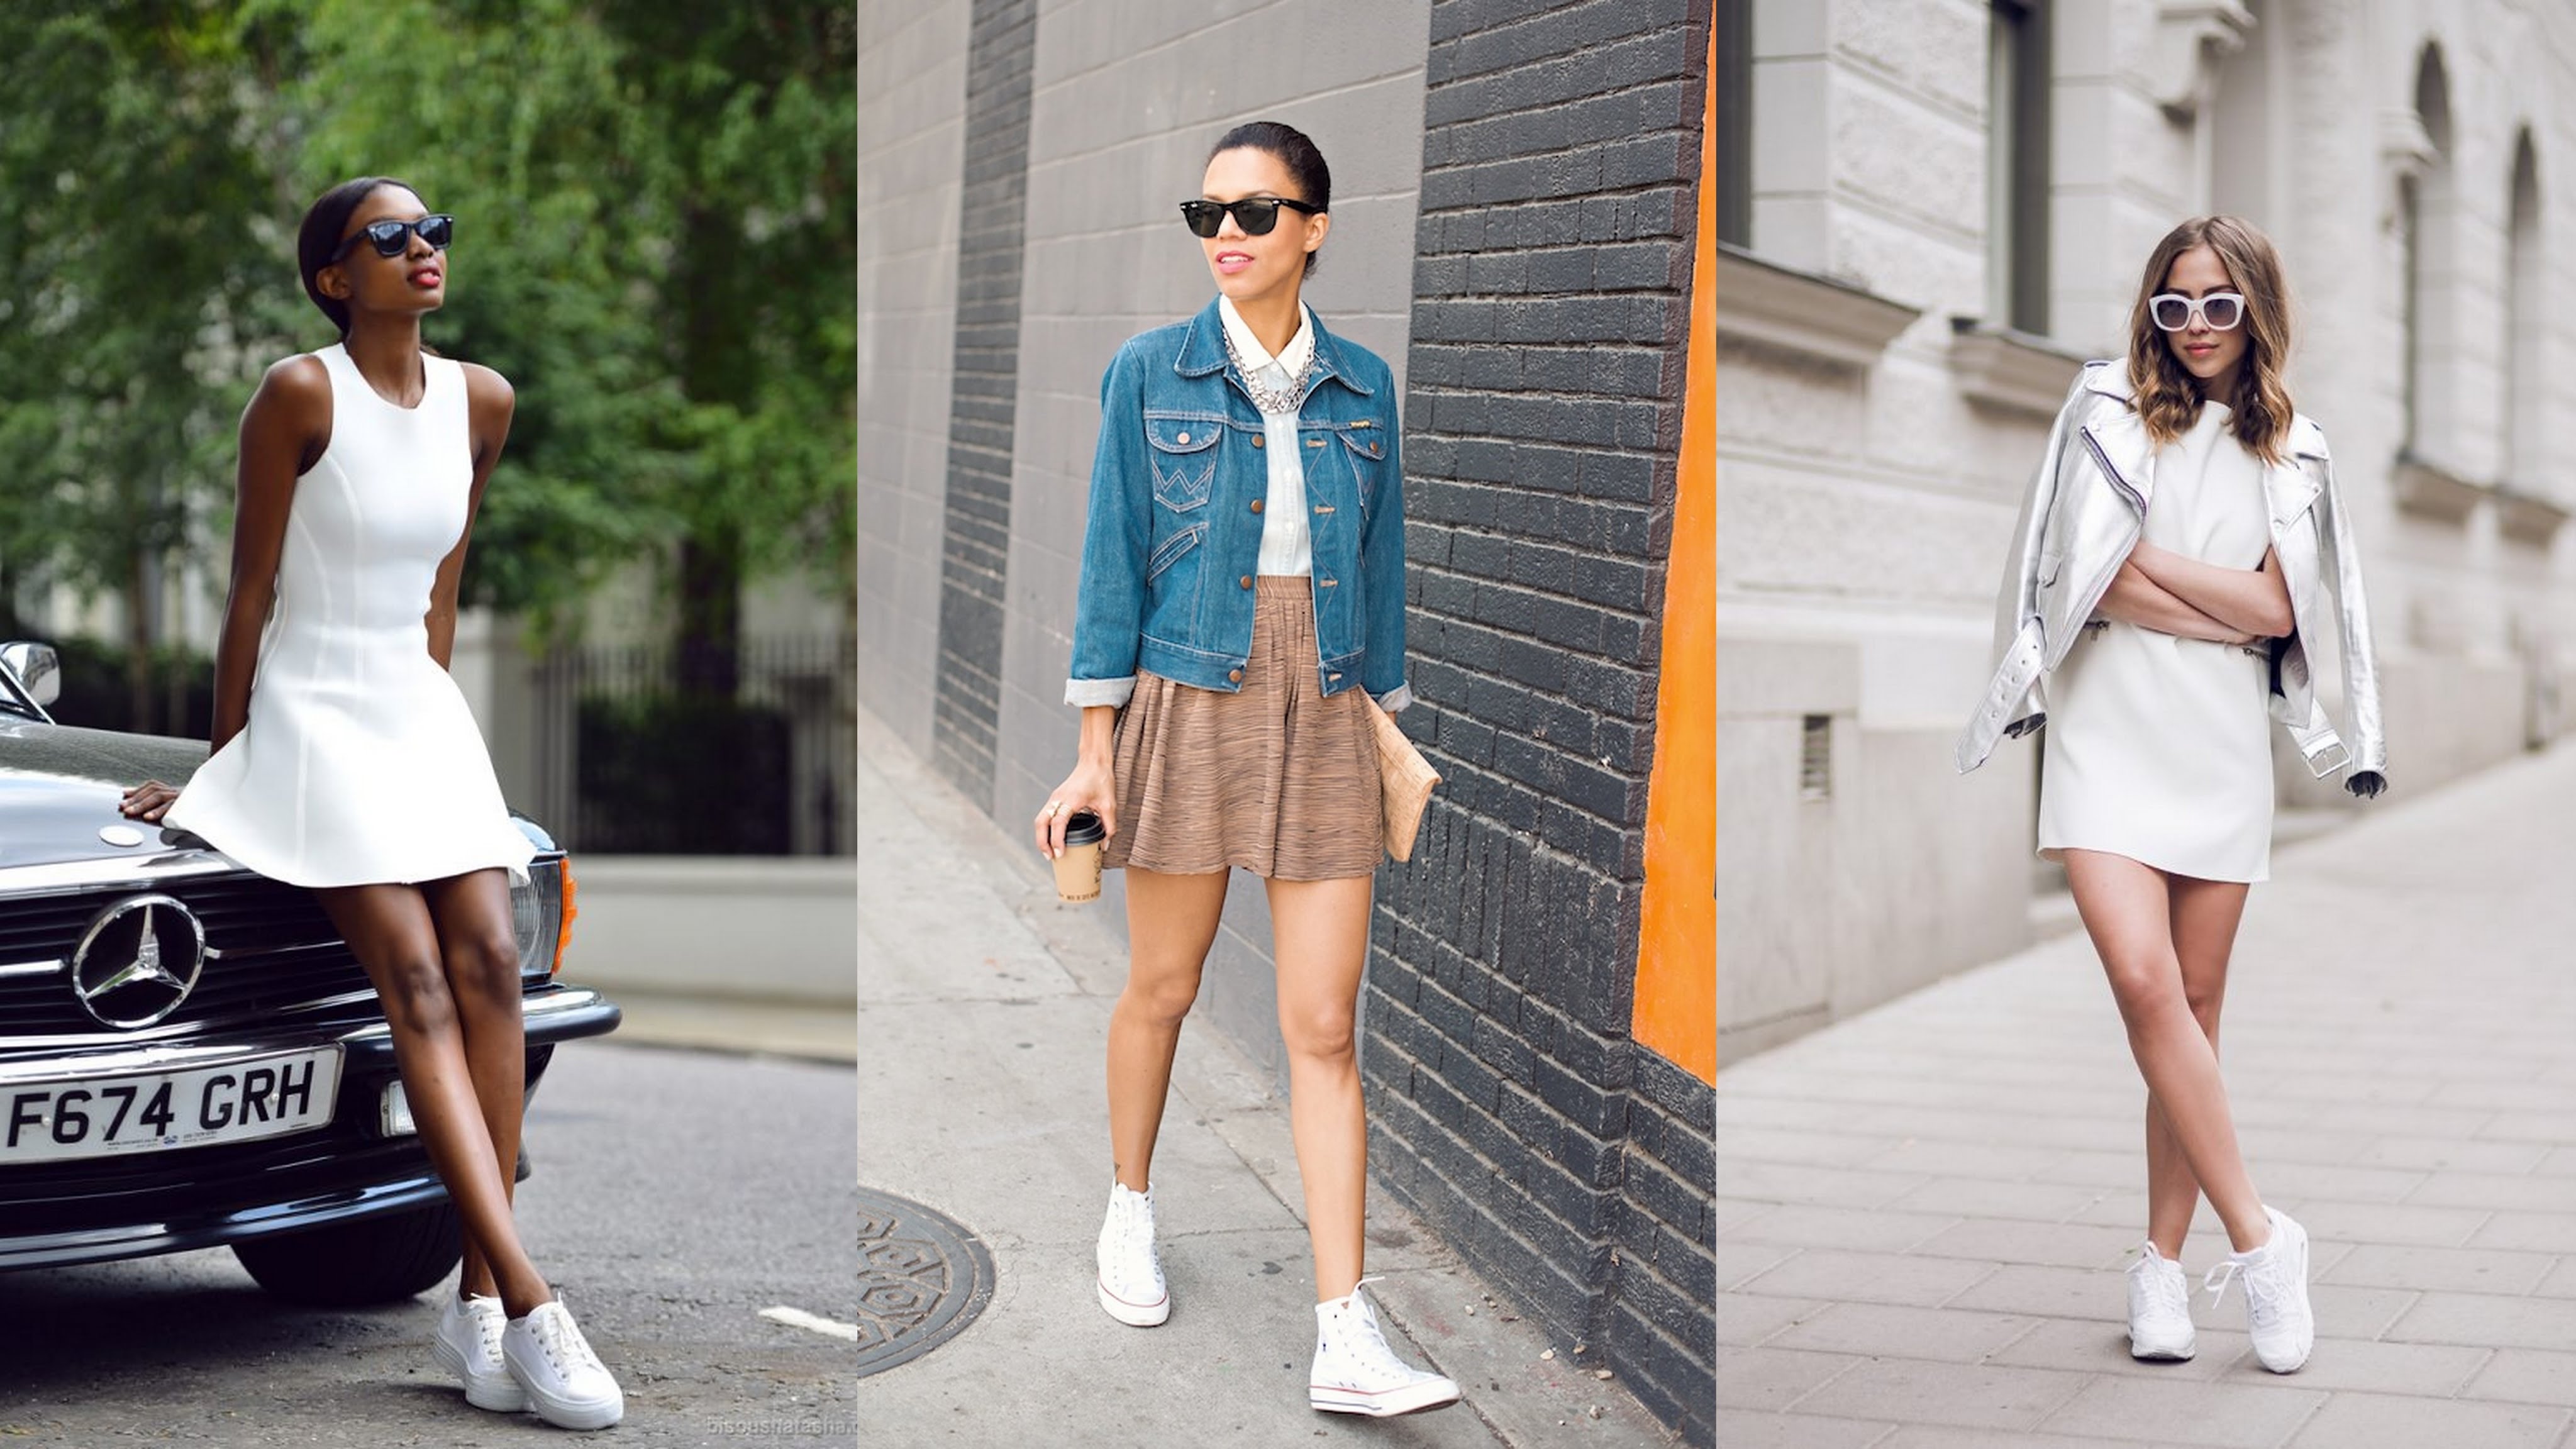 21 Stylish Ways to Wear Sneakers with Skirts and Dresses - YouTube